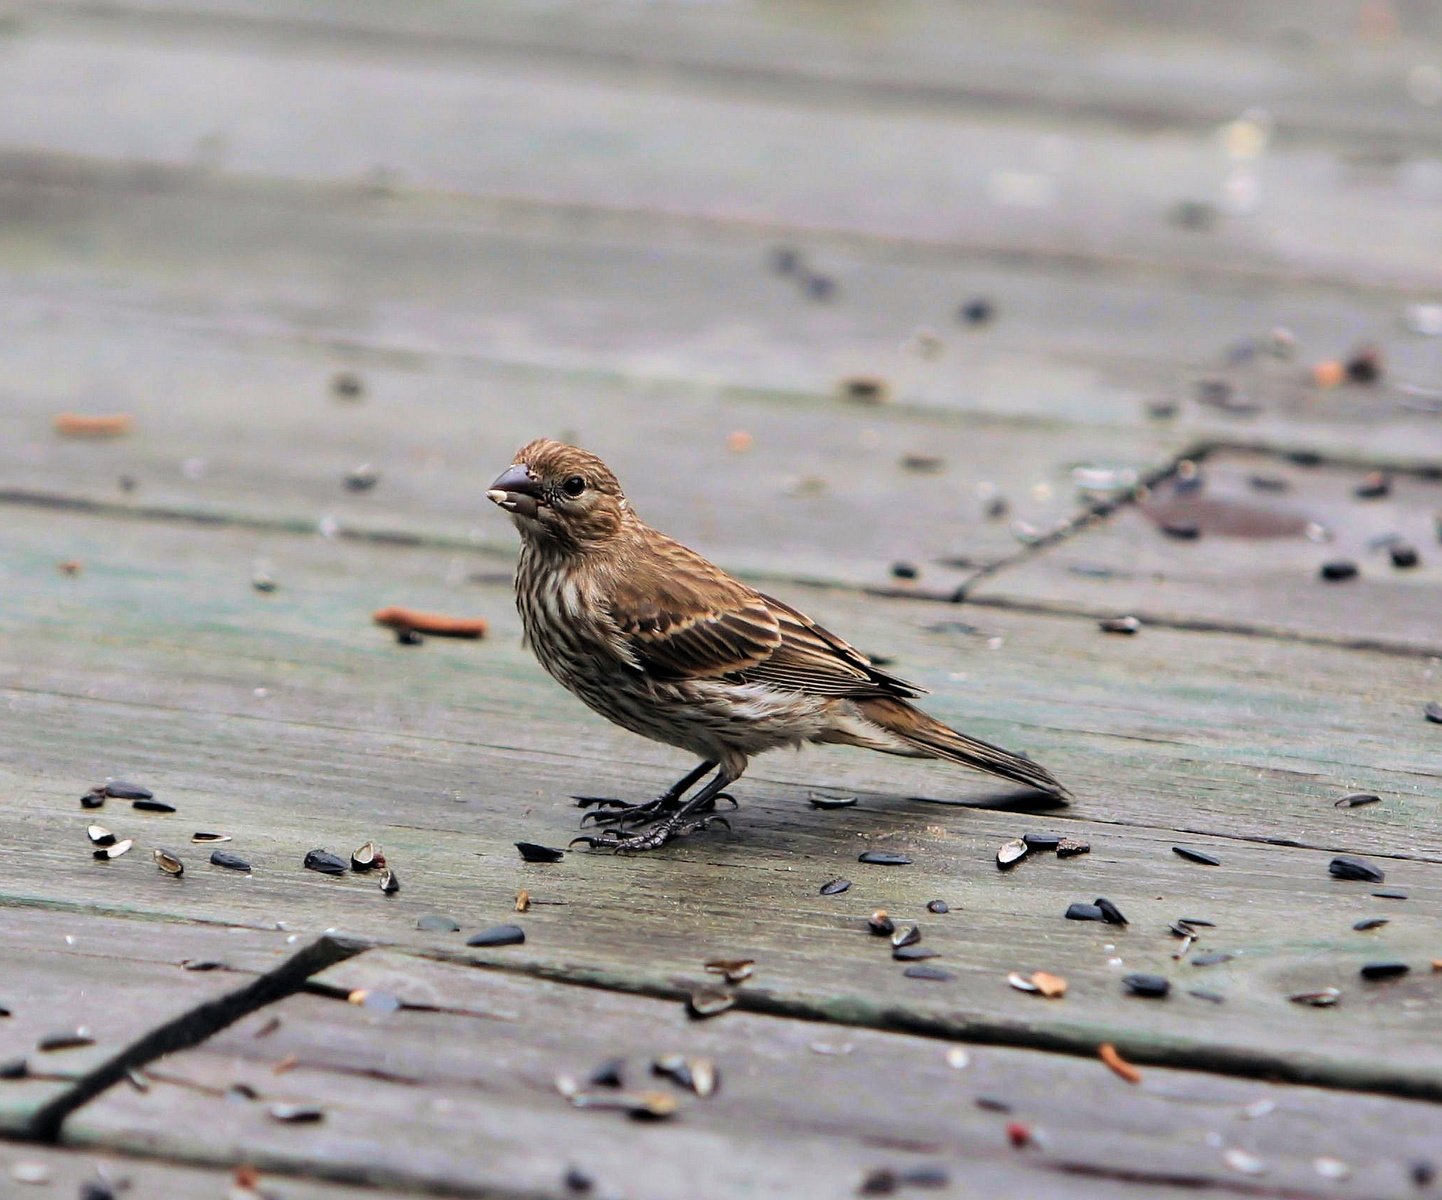 the bird is standing on the wooden deck